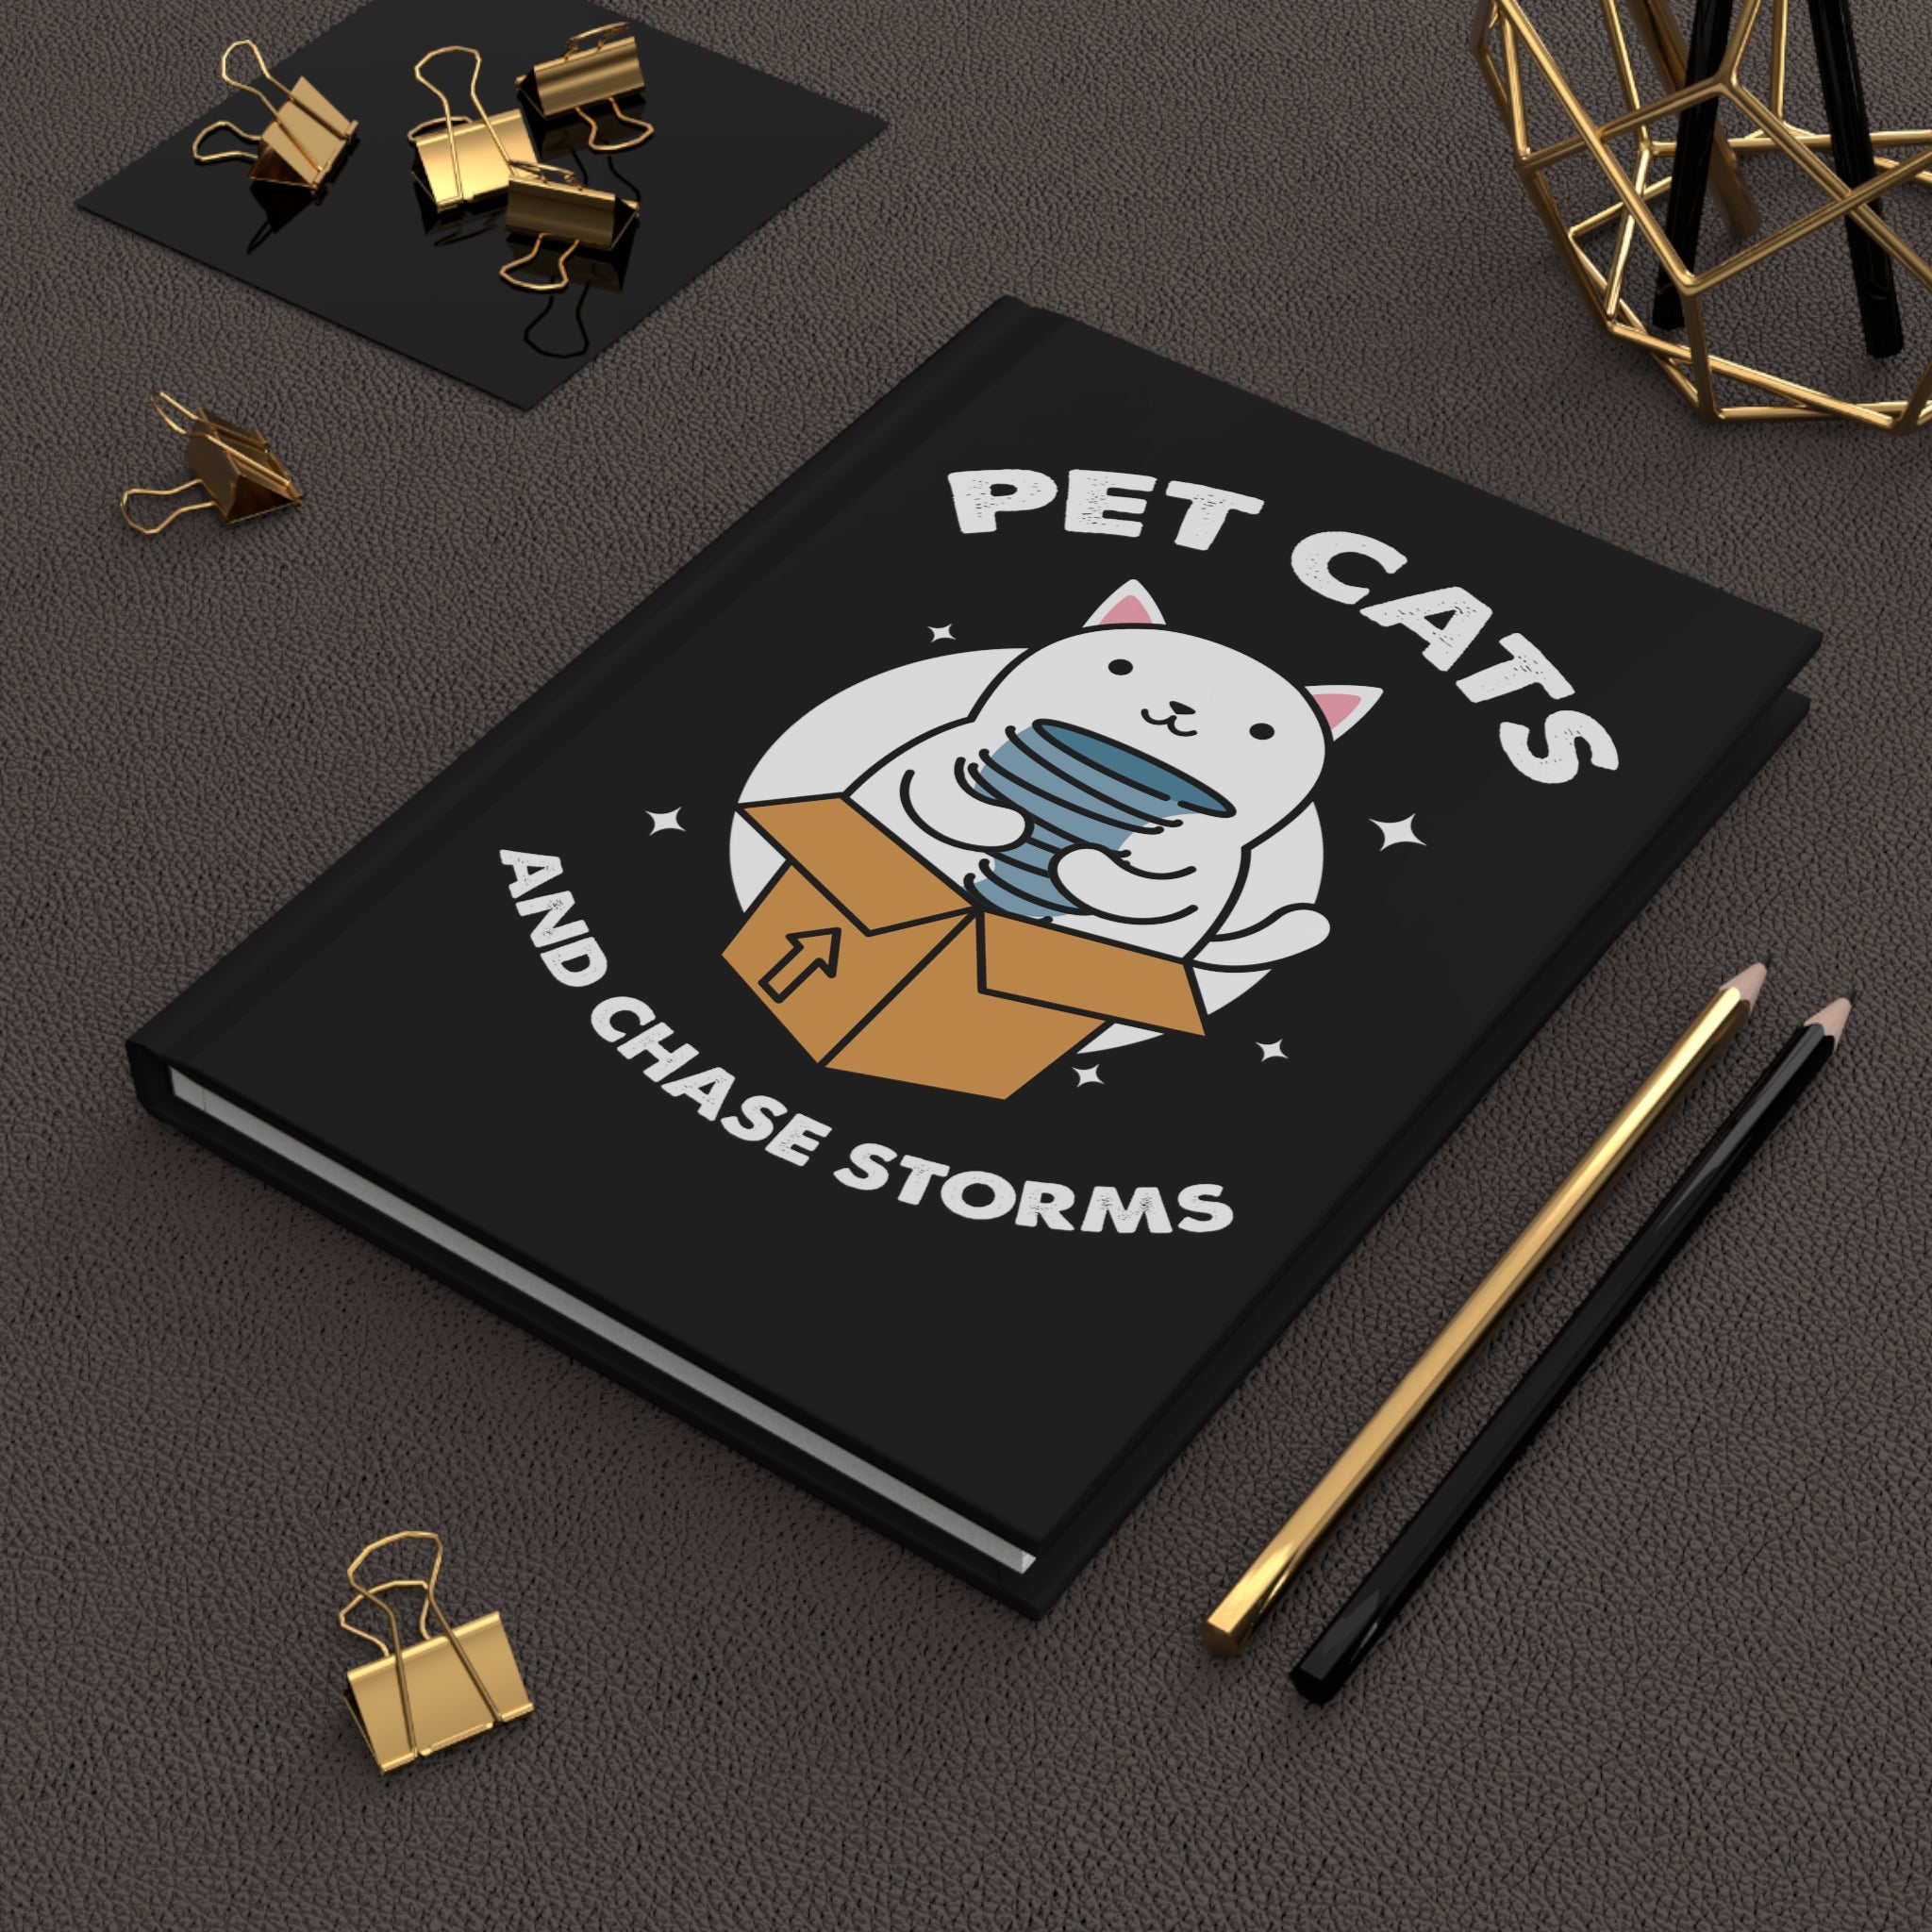 Pet Cats Chase Storms Hardcover Journal 